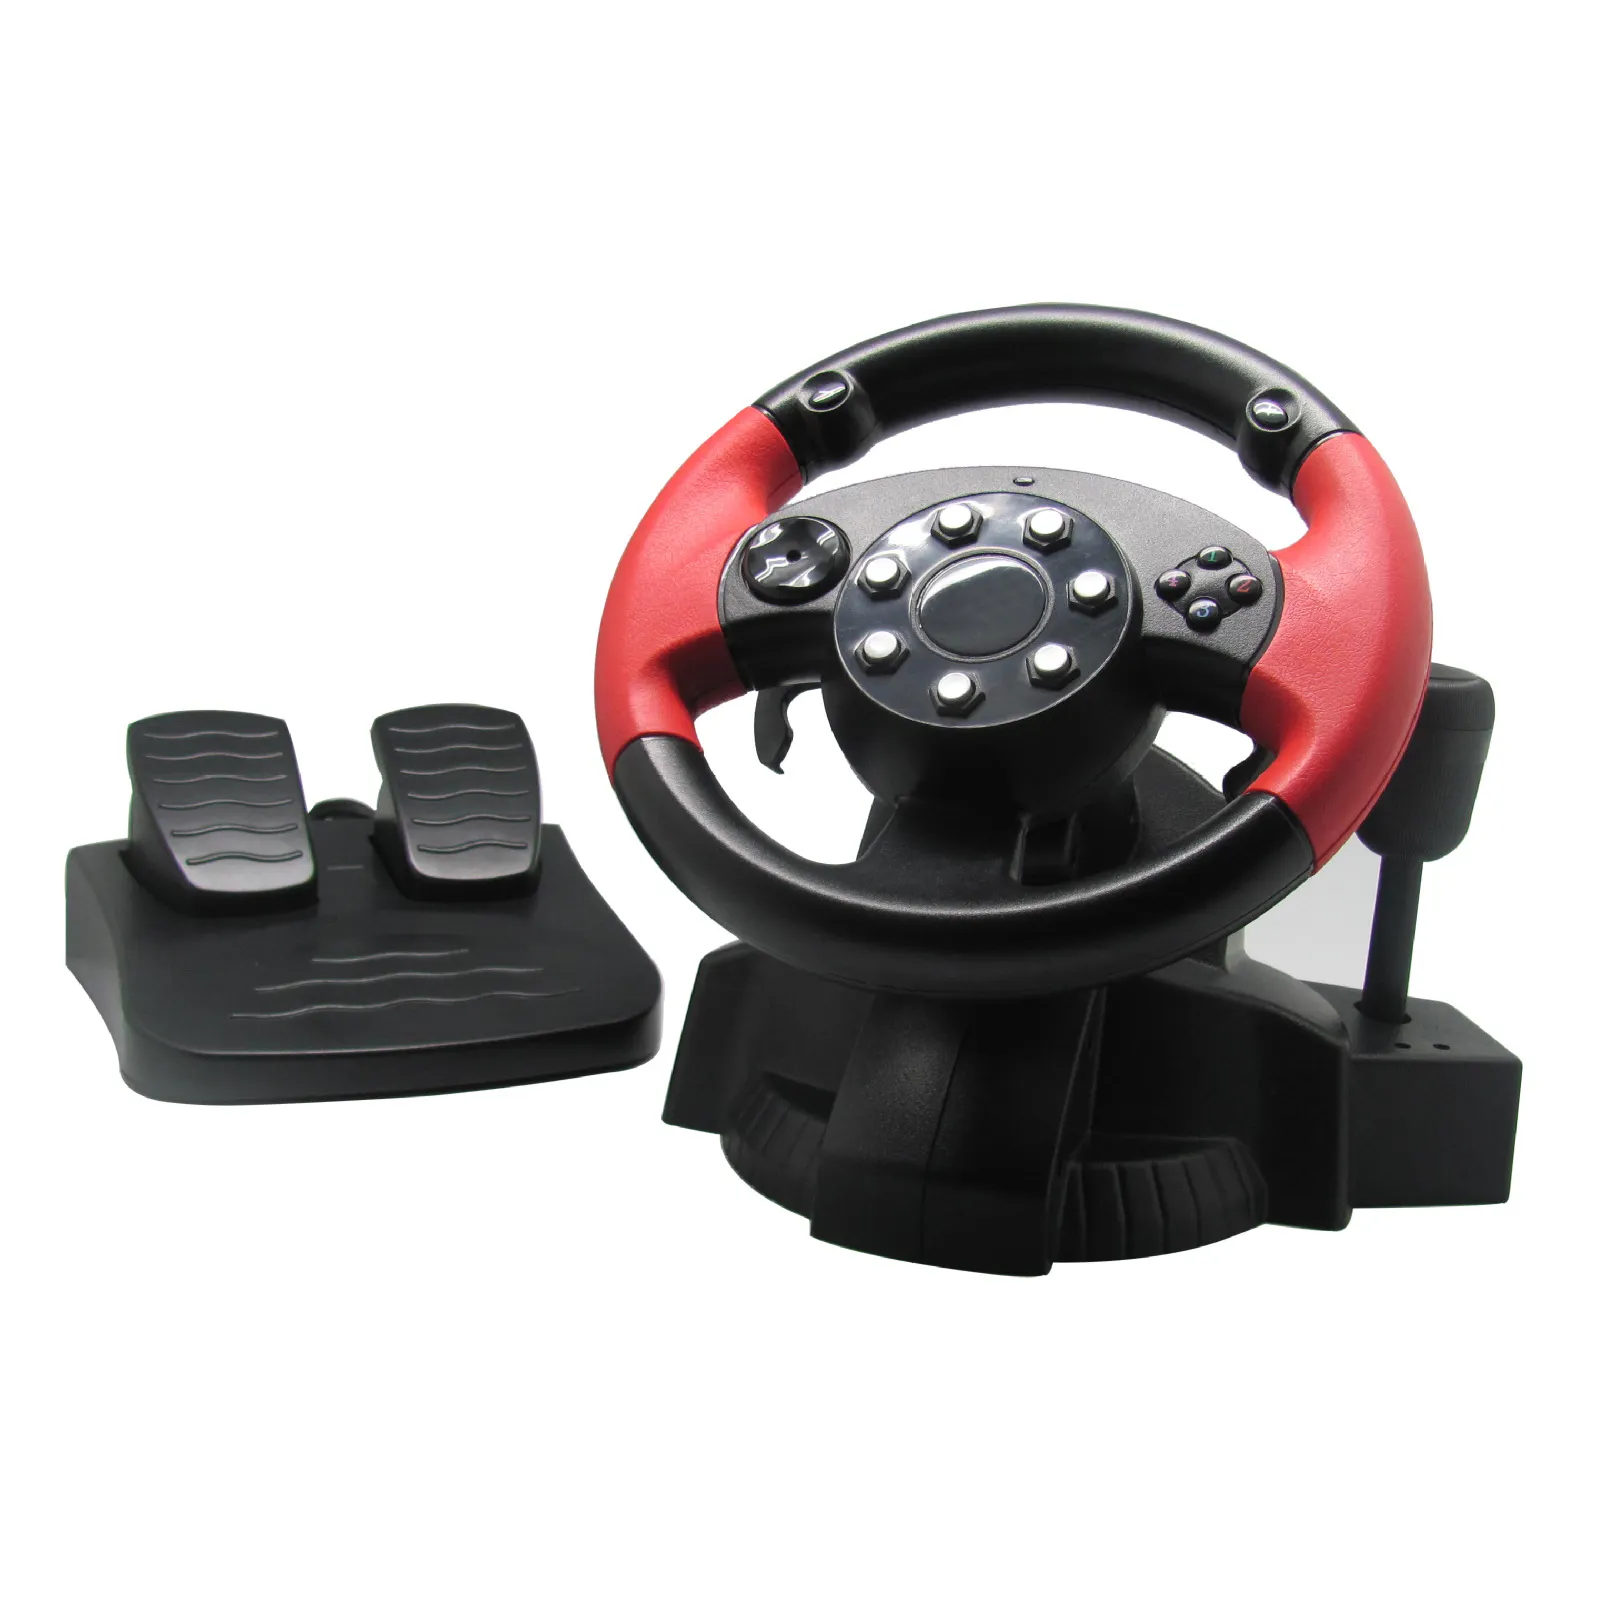 Honcam Factory Steering Wheel Gaming Car Sim Racing Game Driving Force Controller with Brake Pads for PS4 Xbox 360 Xbox One PC